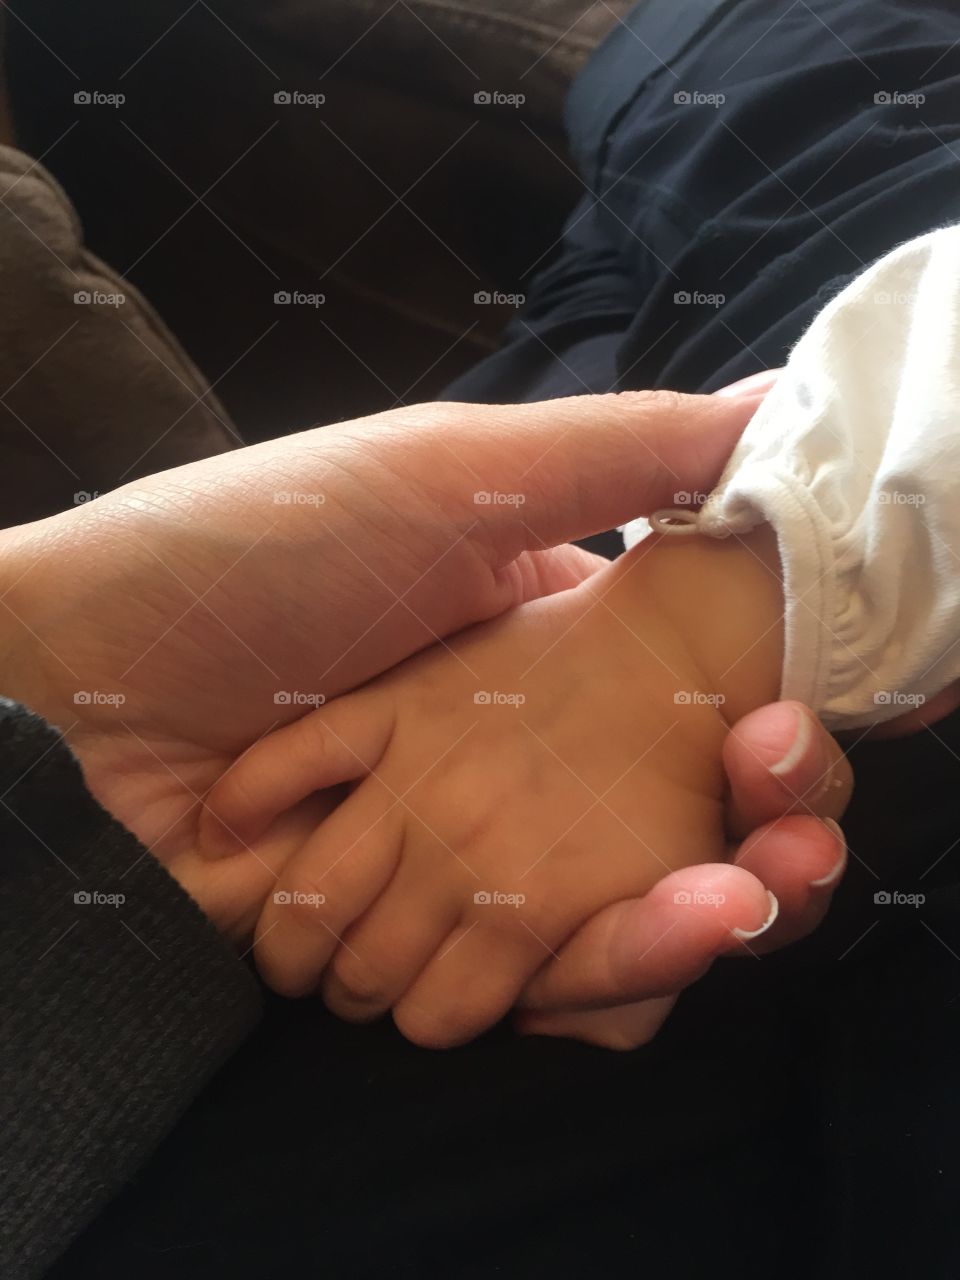 Holding Mommies hand